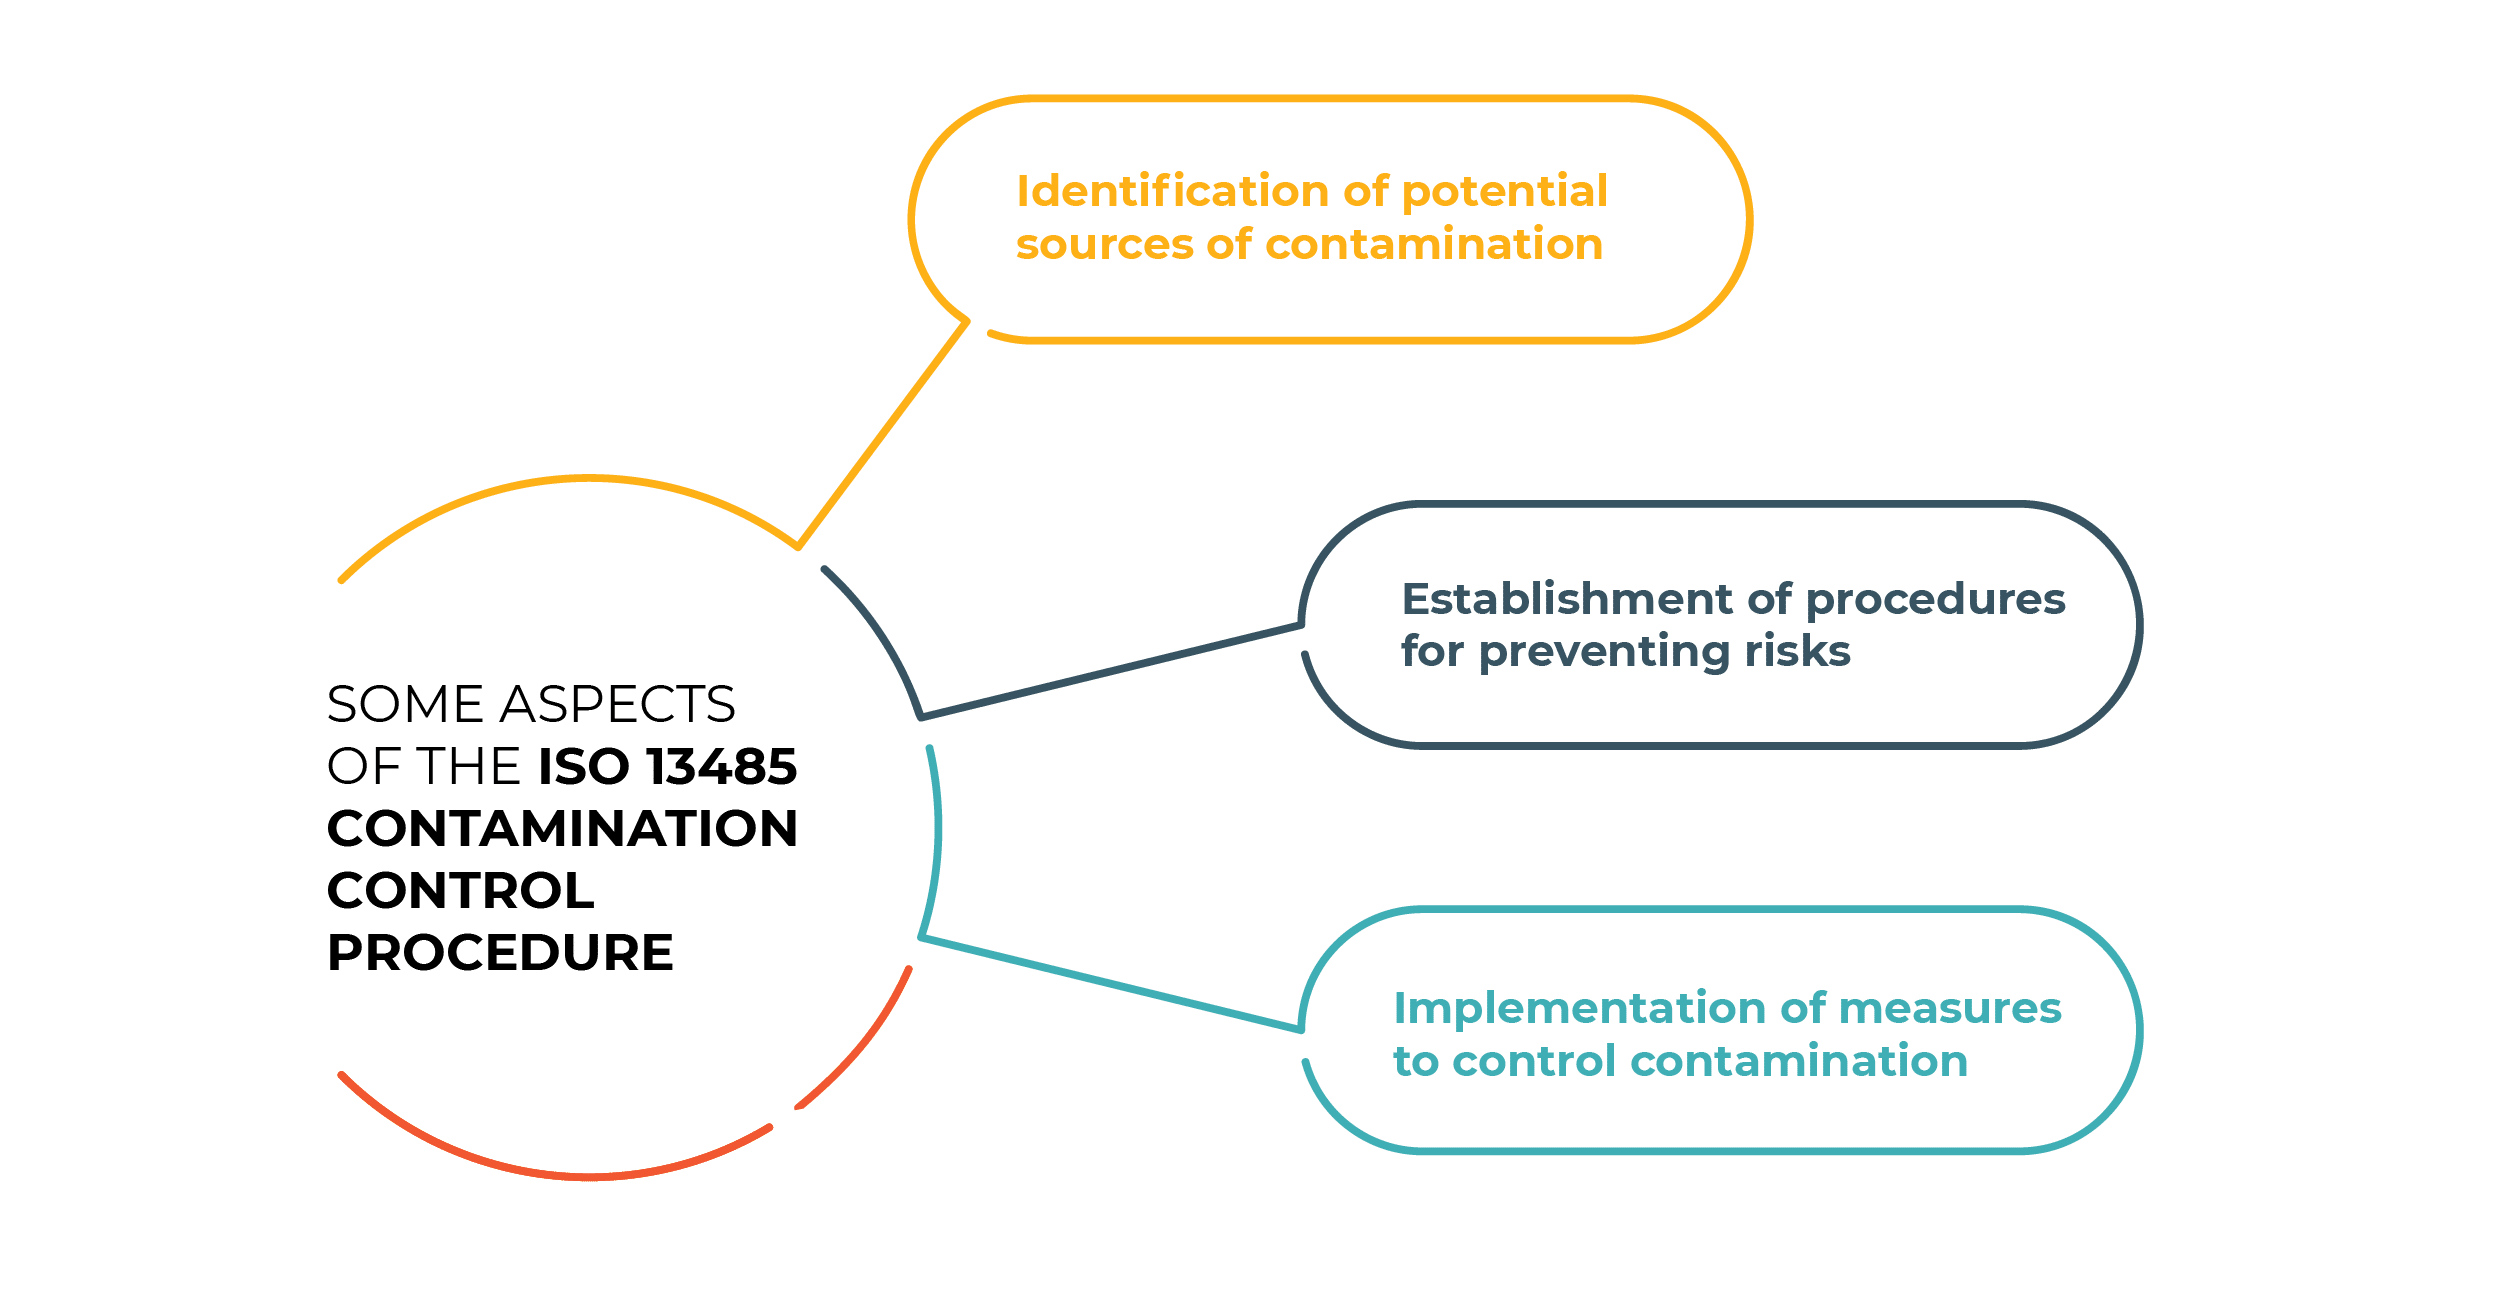 Some aspects of the ISO 13485 contamination control procedure